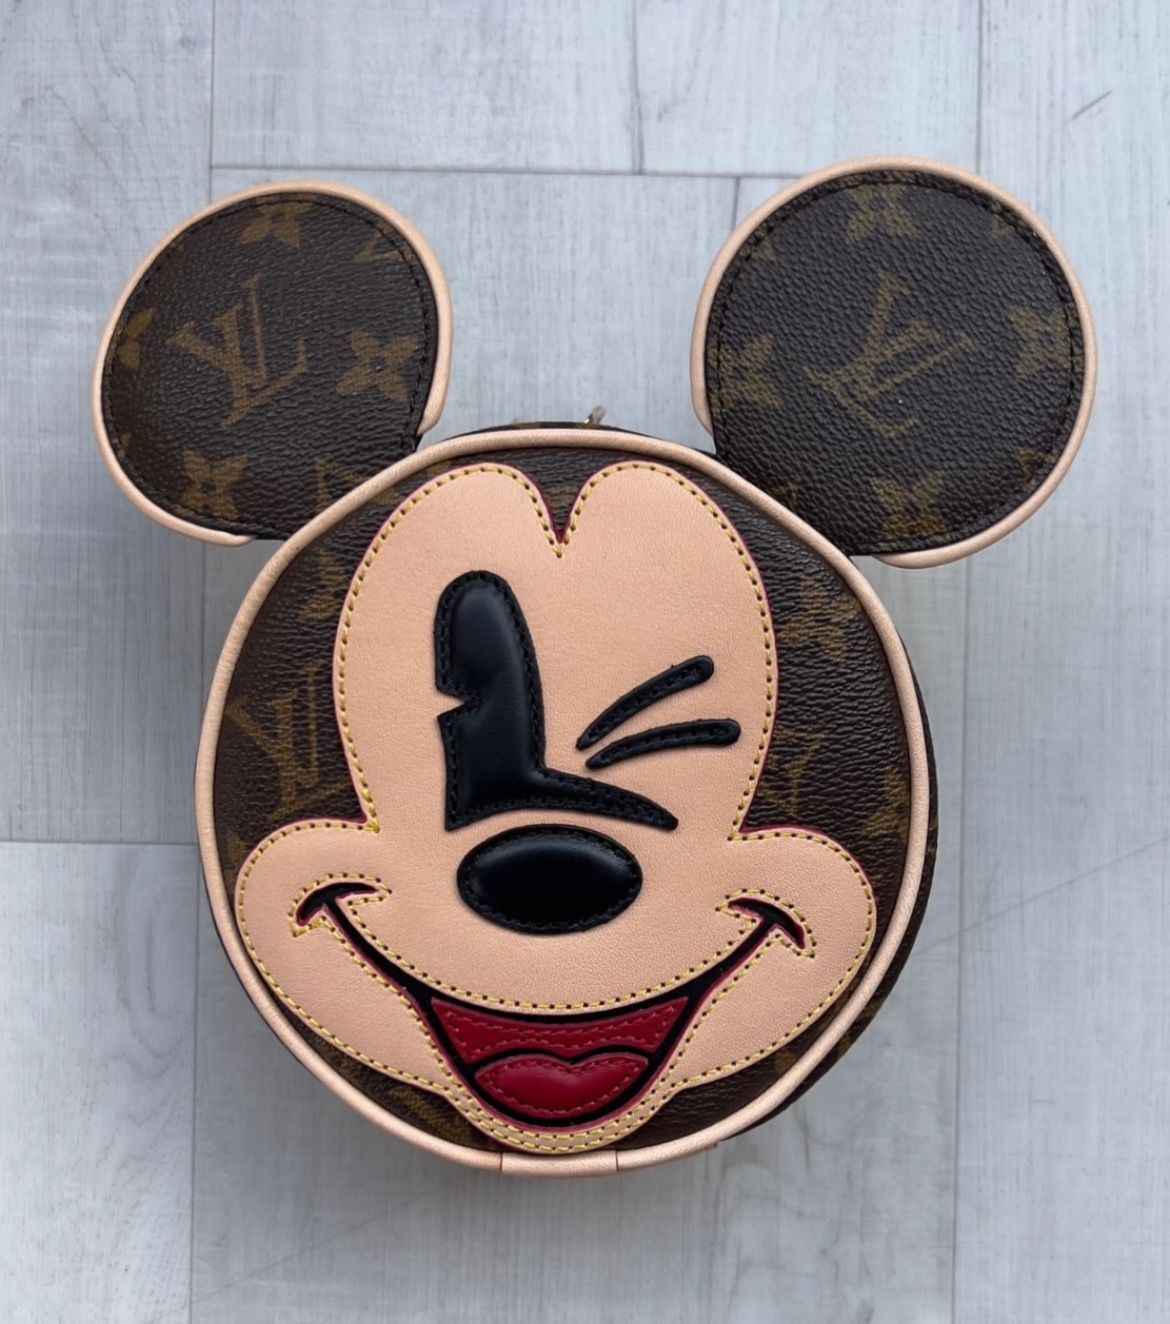 Sheron Barber x Louis Vuitton Mickey Mouse Bags Are Here